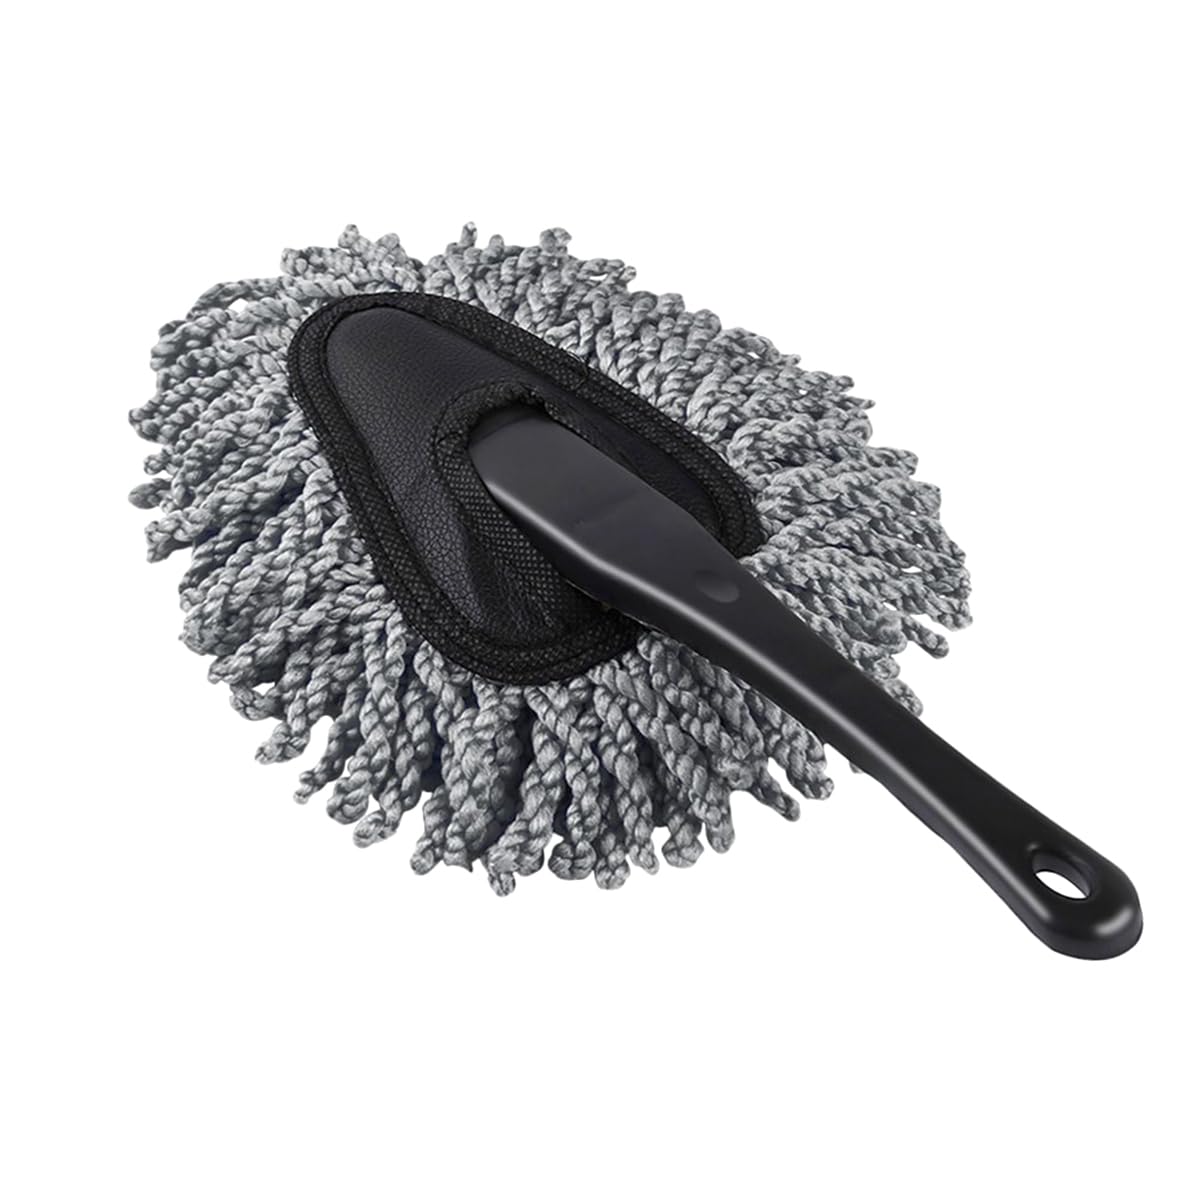 Book Cover Multi-Functional Car Dash Duster, Car Interior & Exterior Cleaning Dirt Dust Clean Brush Dusting Tool Mop Gray car Cleaning Products (Gray)